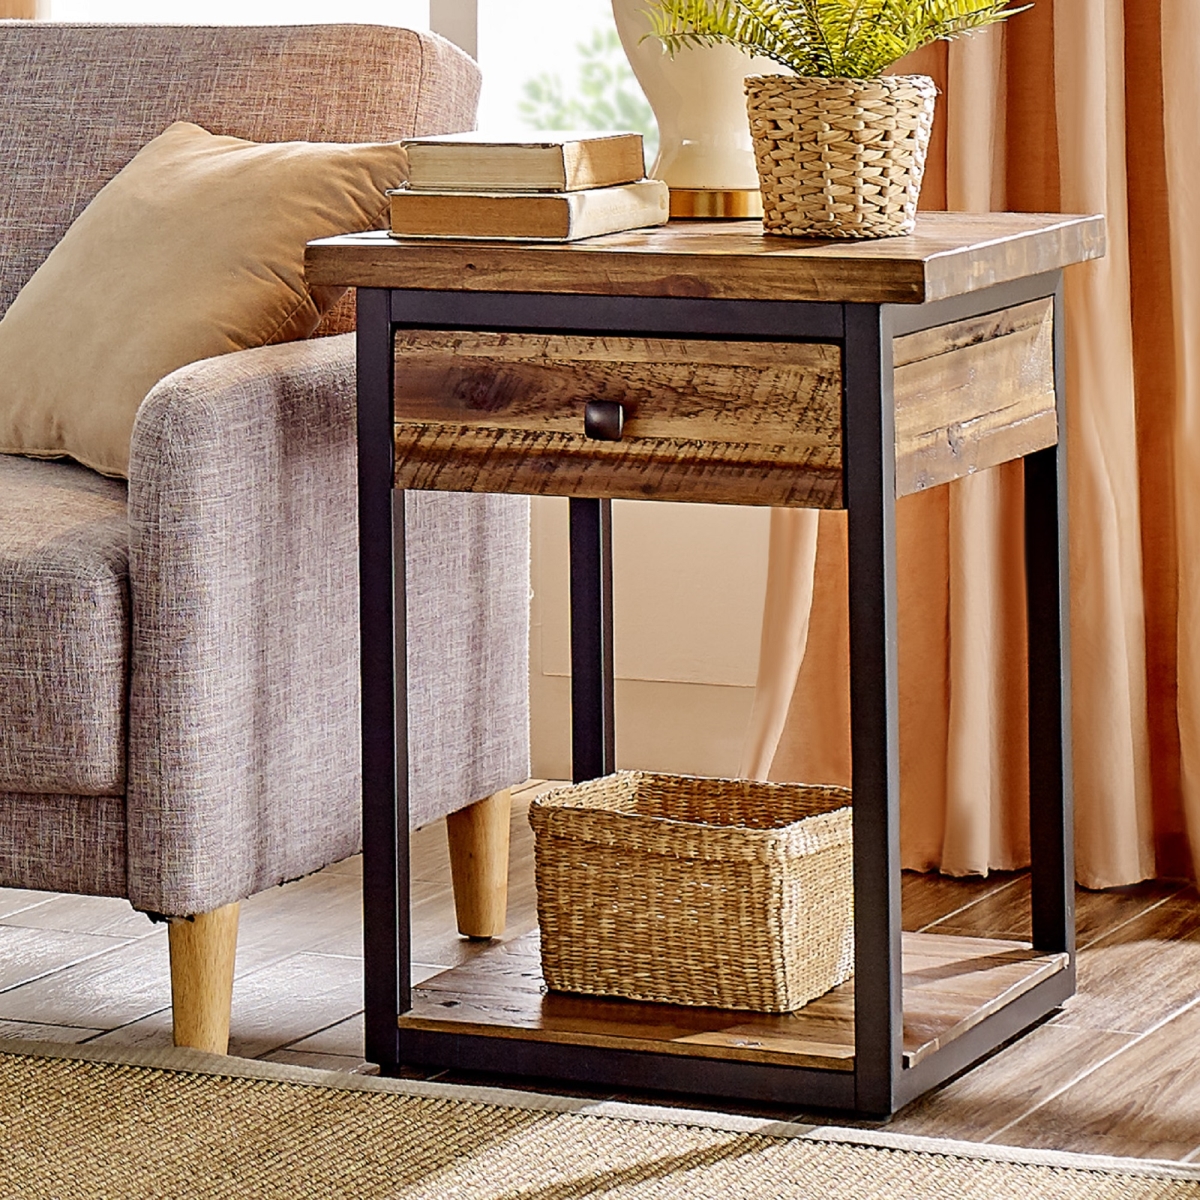 Picture of Alaterre ANCM0174 Claremont Rustic Wood End Table with Drawer & Low Shelf